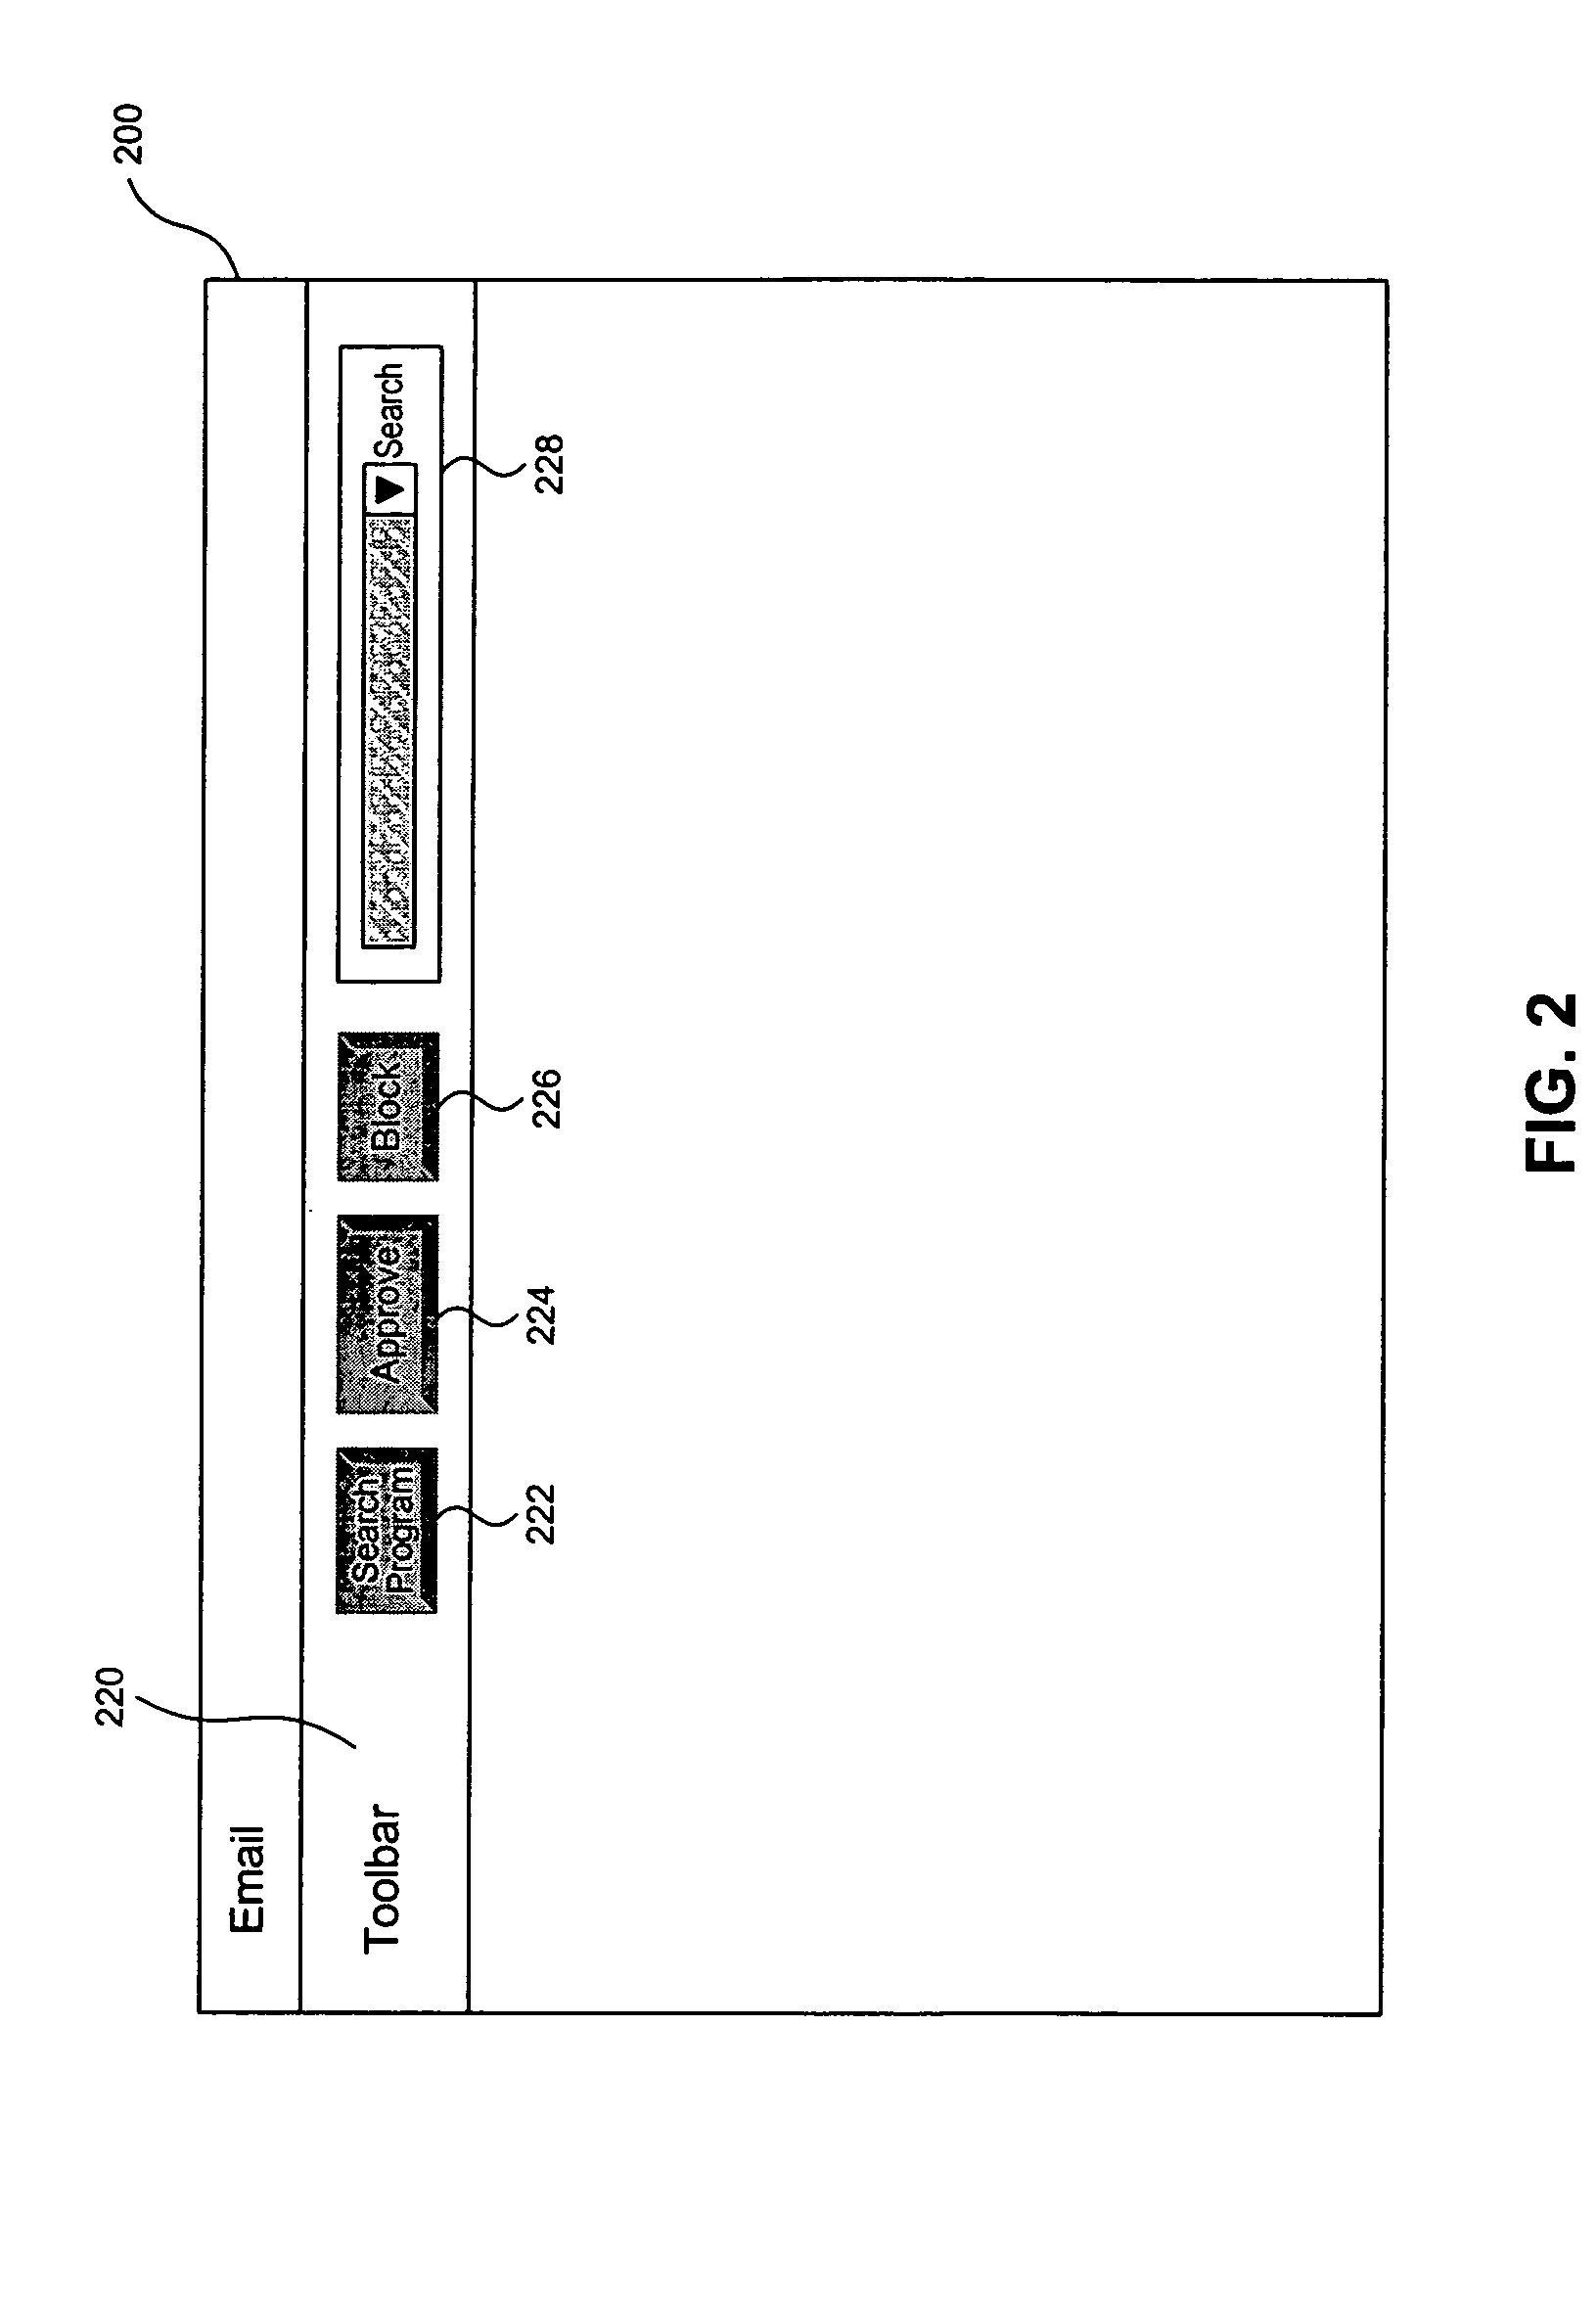 Method, apparatus, and computer program product for indexing, synchronizing and searching digital data